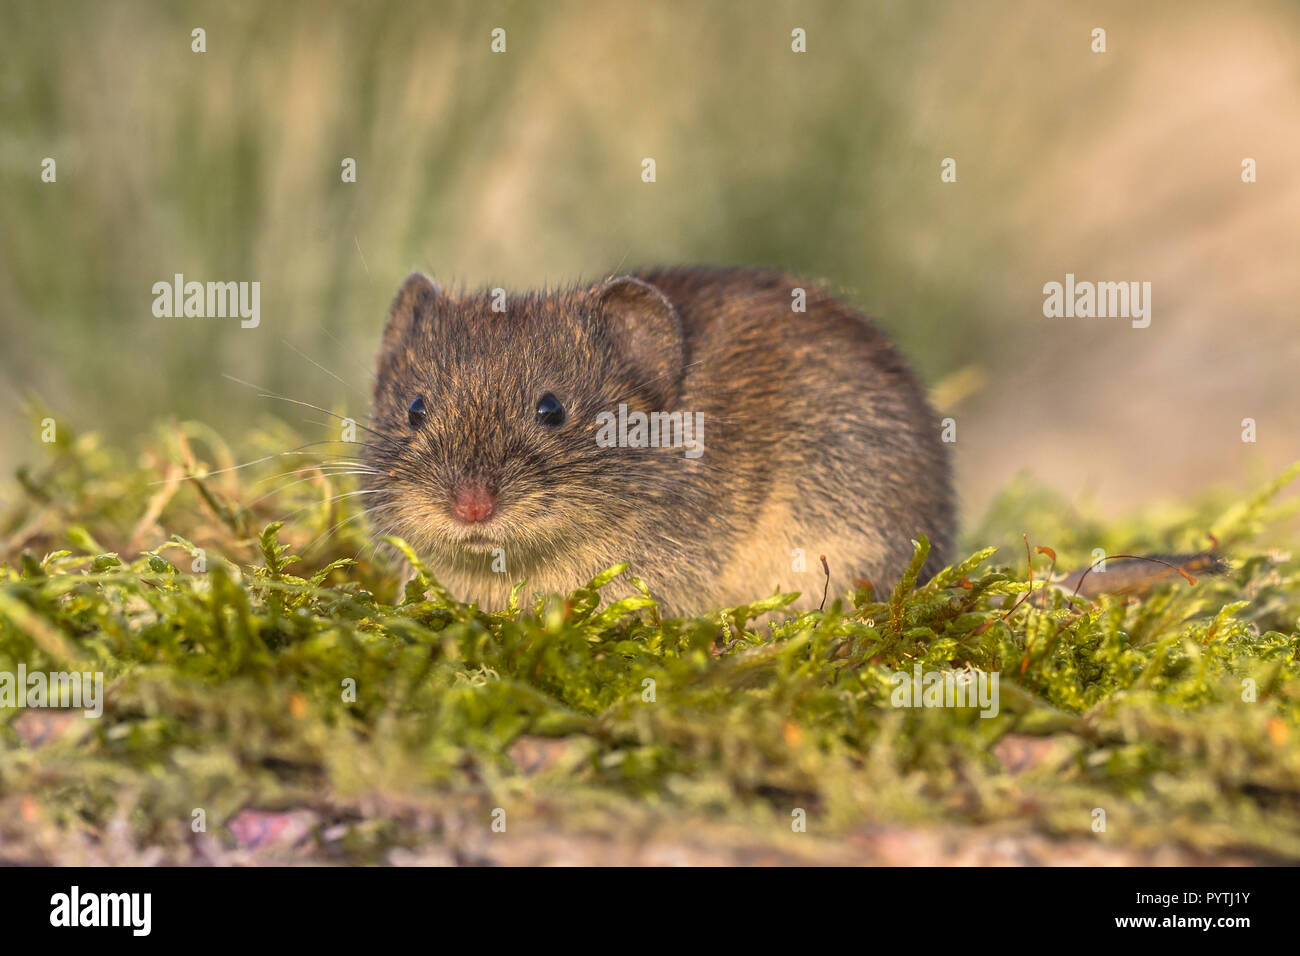 Wild Bank vole (Myodes glareolus; formerly Clethrionomys glareolus). Small vole with red-brown fur in natural environment Stock Photo